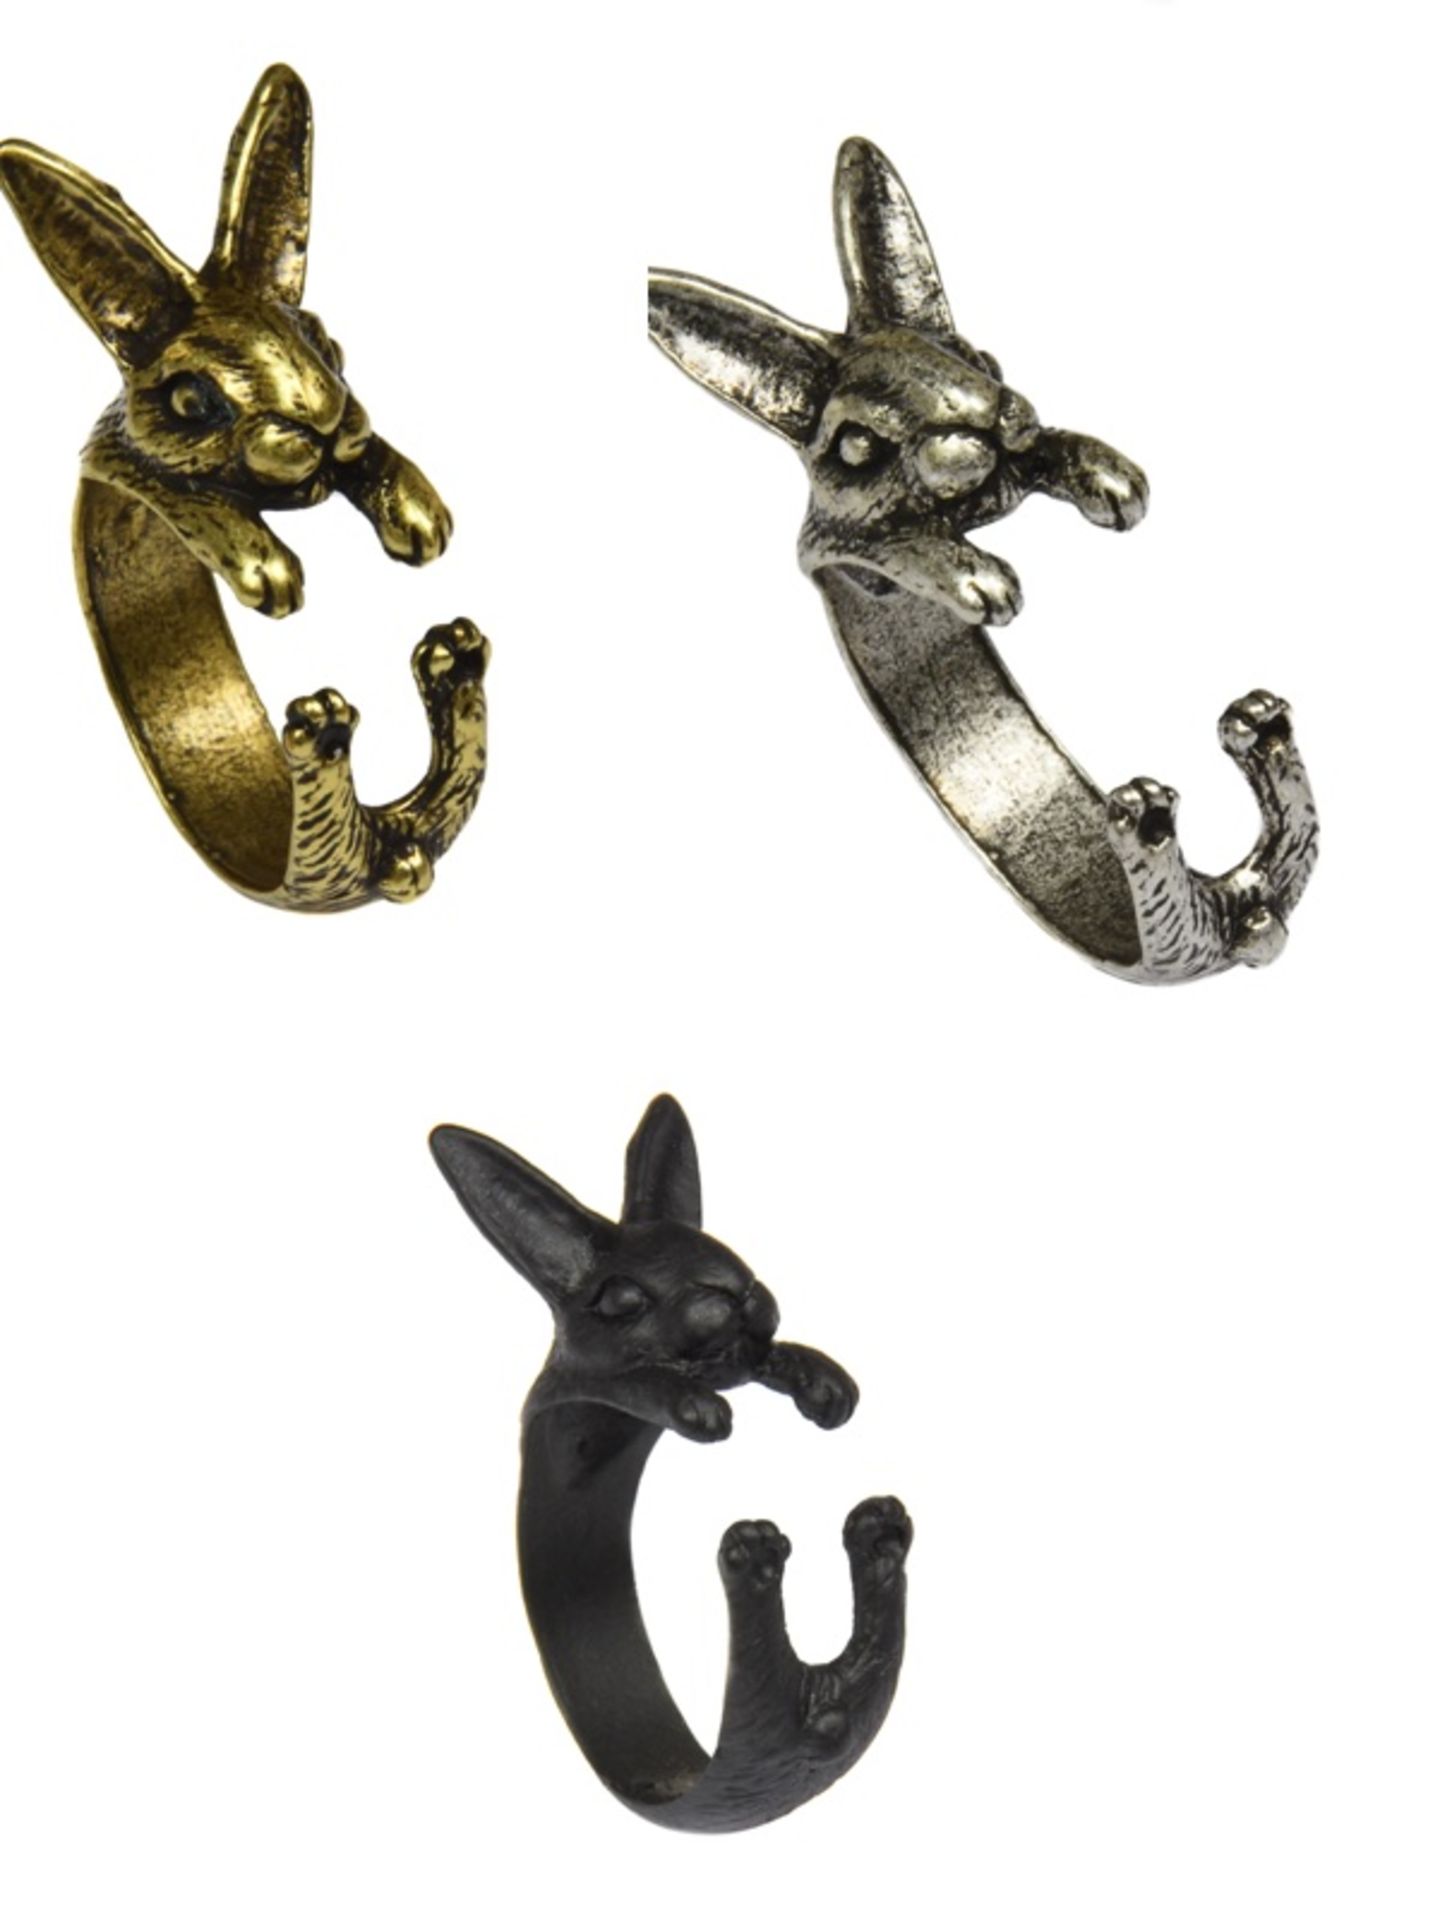 200+ Animal themed rings with velvet accessories bags - New - High Quality - Image 7 of 7